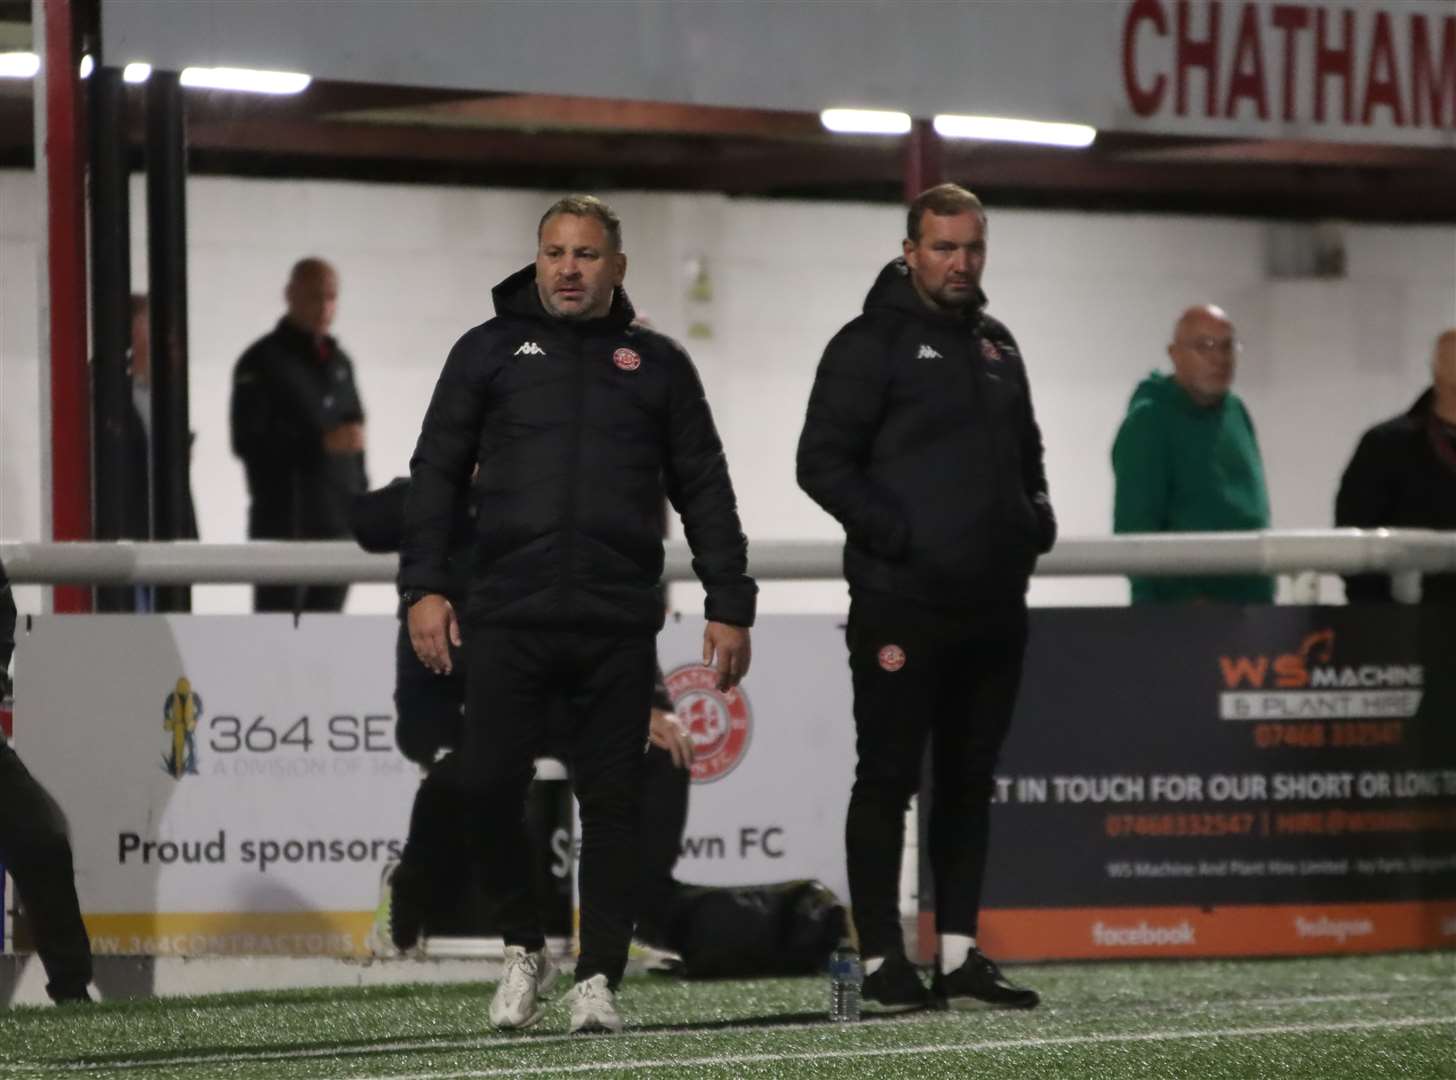 Chatham are chasing triple success but manager Kevin Hake knows “things can change in a heartbeat” Picture: Max English